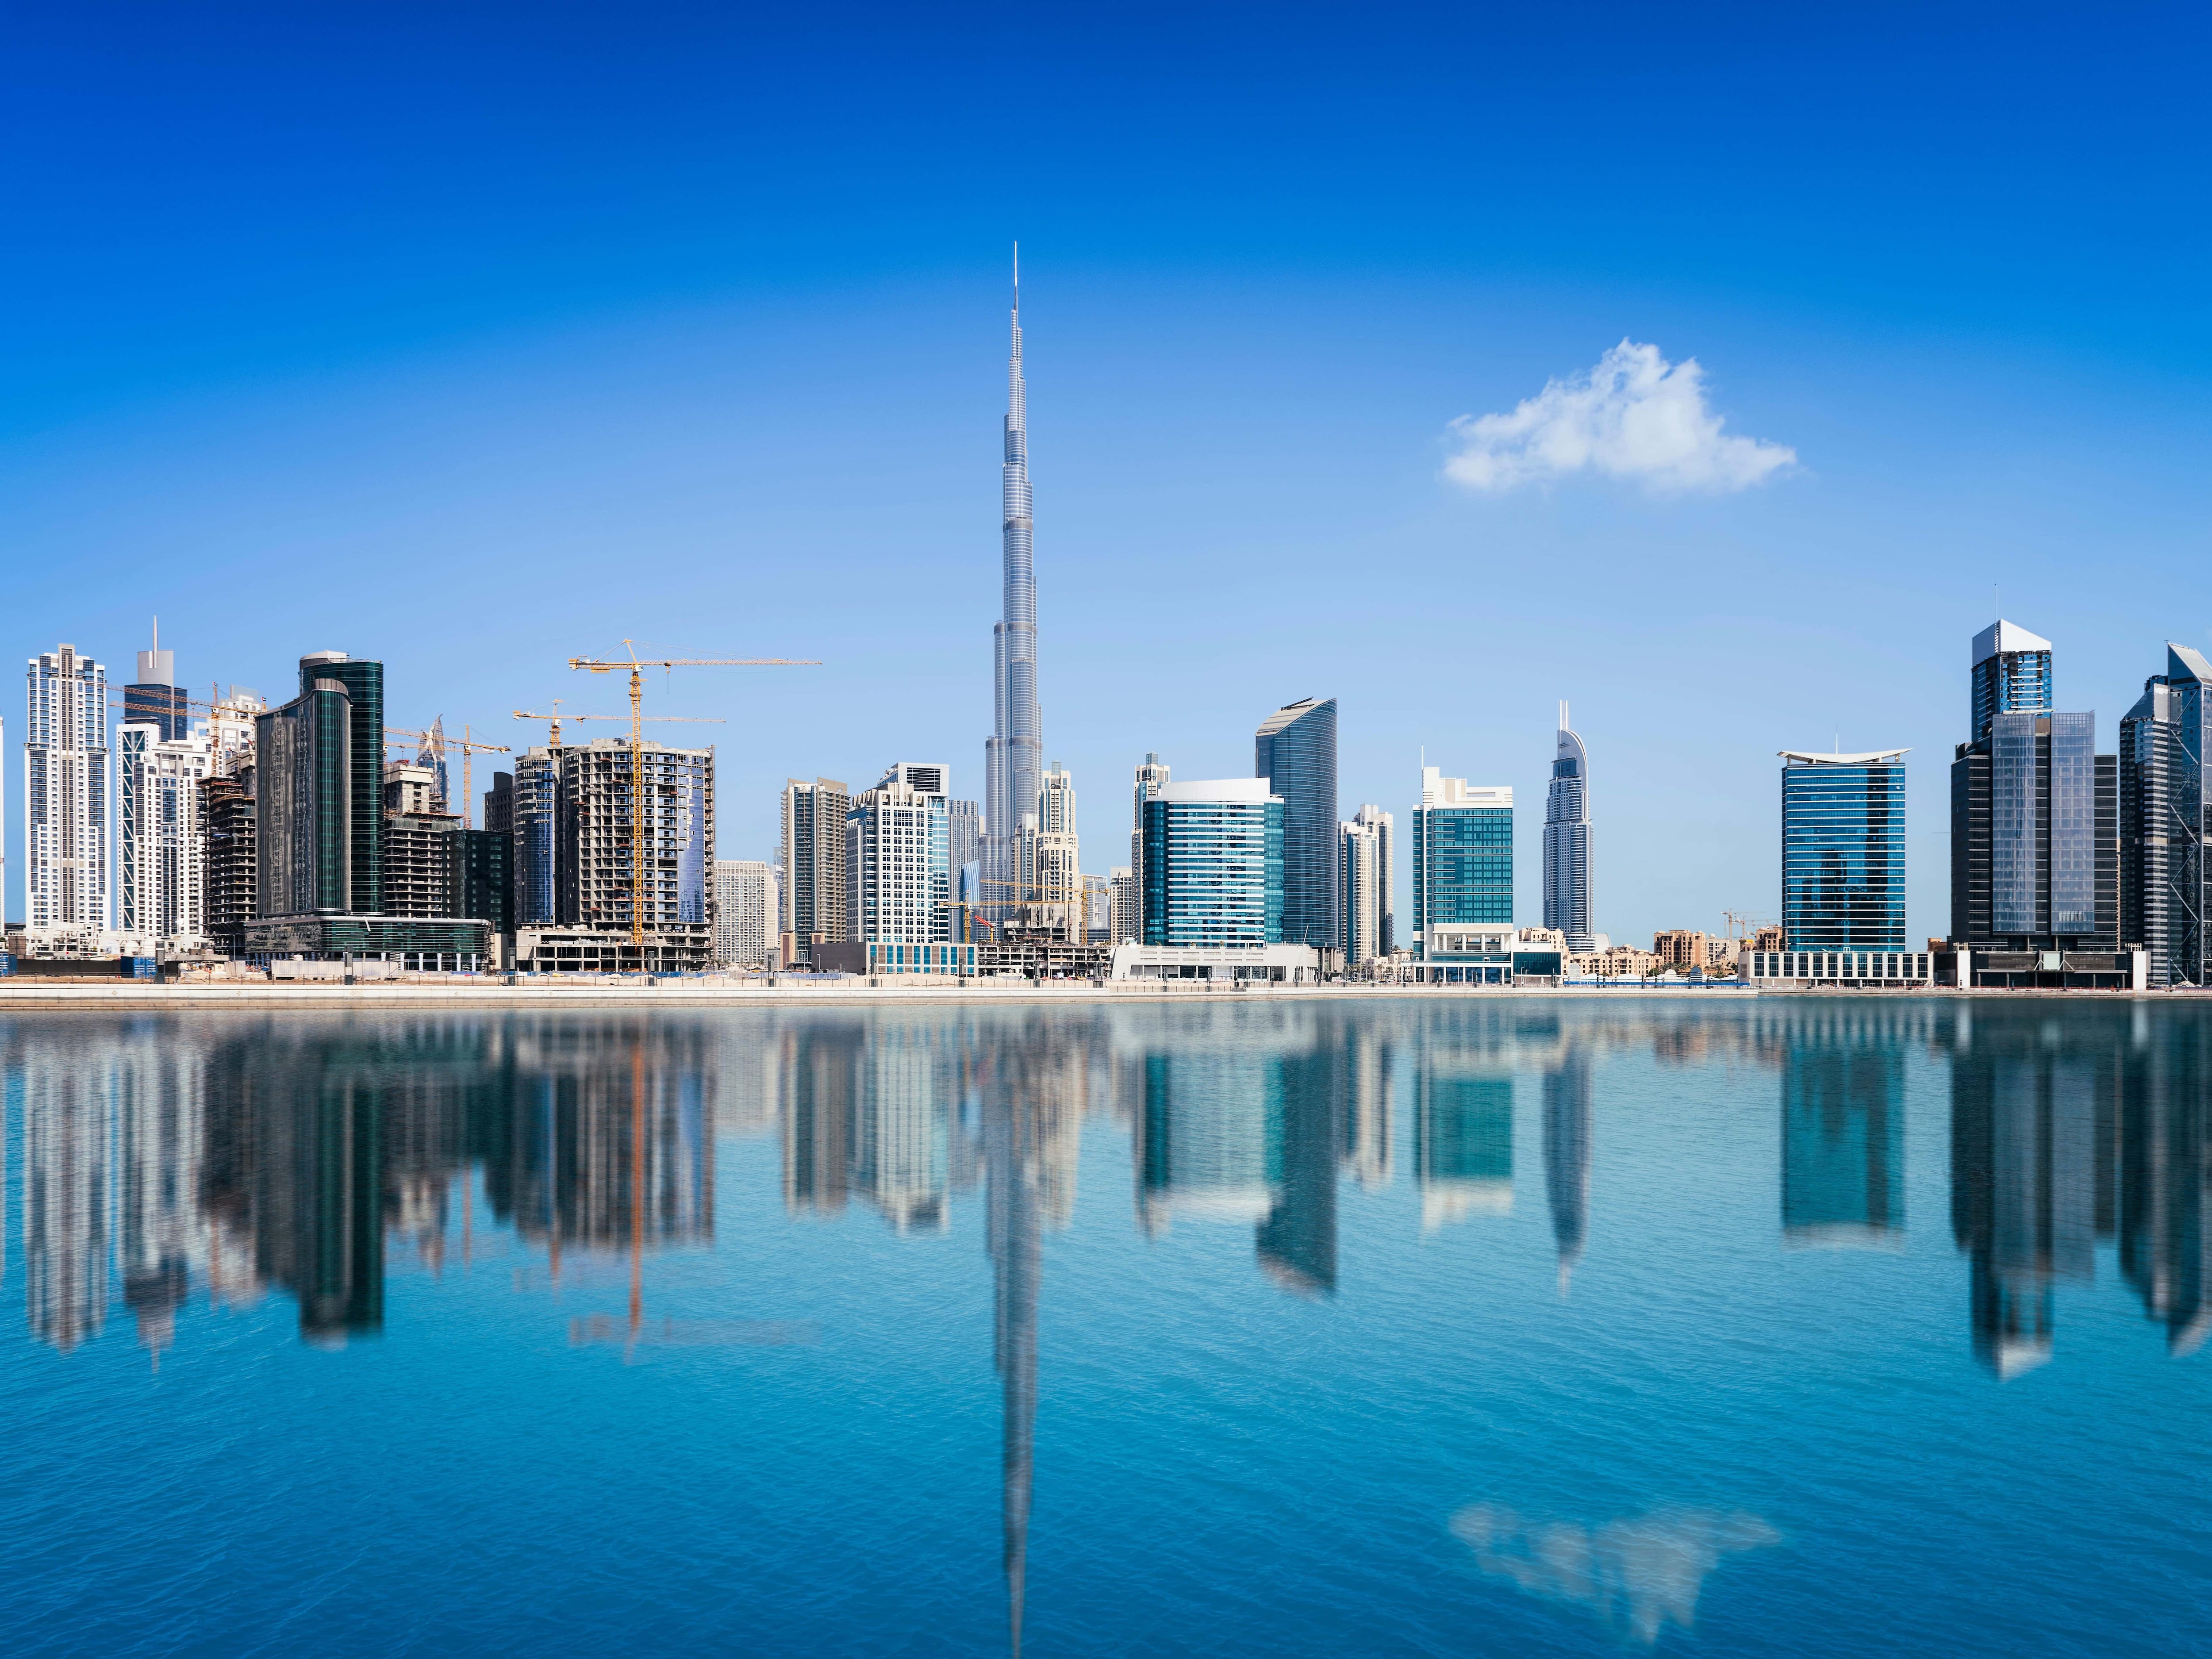 Irish woman ‘charged with attempted suicide in Dubai is trying to stay positive’